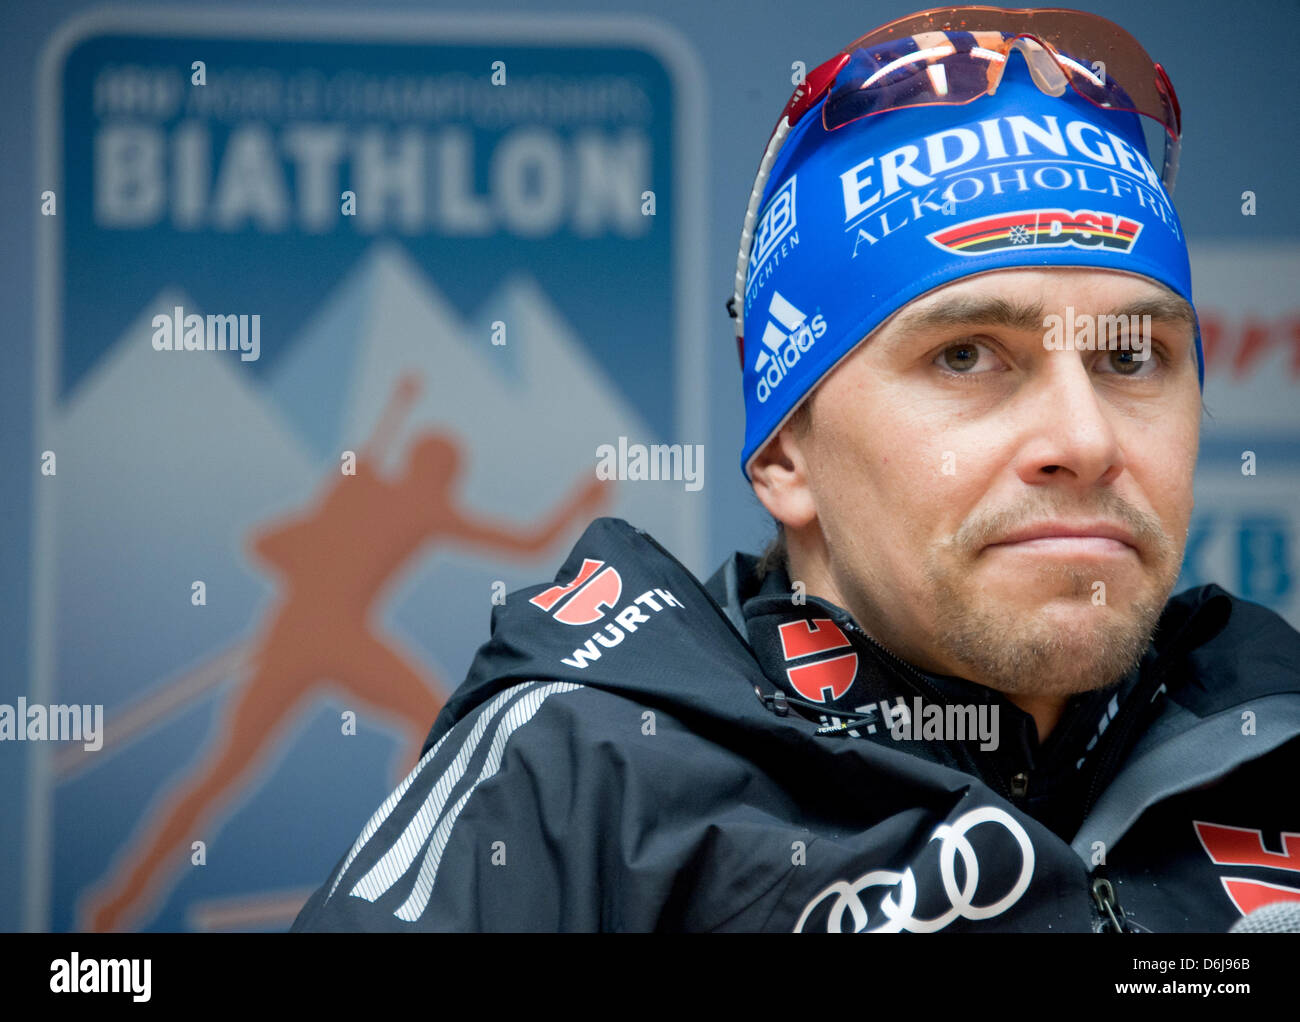 German biathlet Michael Greis gives a press conference during the biathlon world championships at the Chiemgau Arena in Ruhpolding, Germany, 08 March 2012. Photo: PETER KNEFFEL Stock Photo